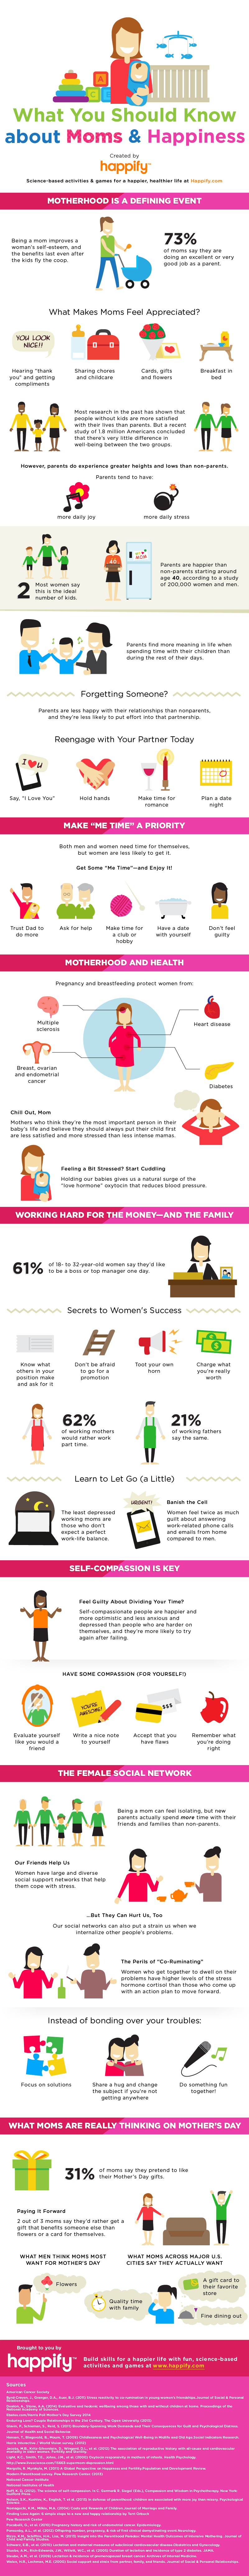 Infographic for Moms & Happiness - An Infographic